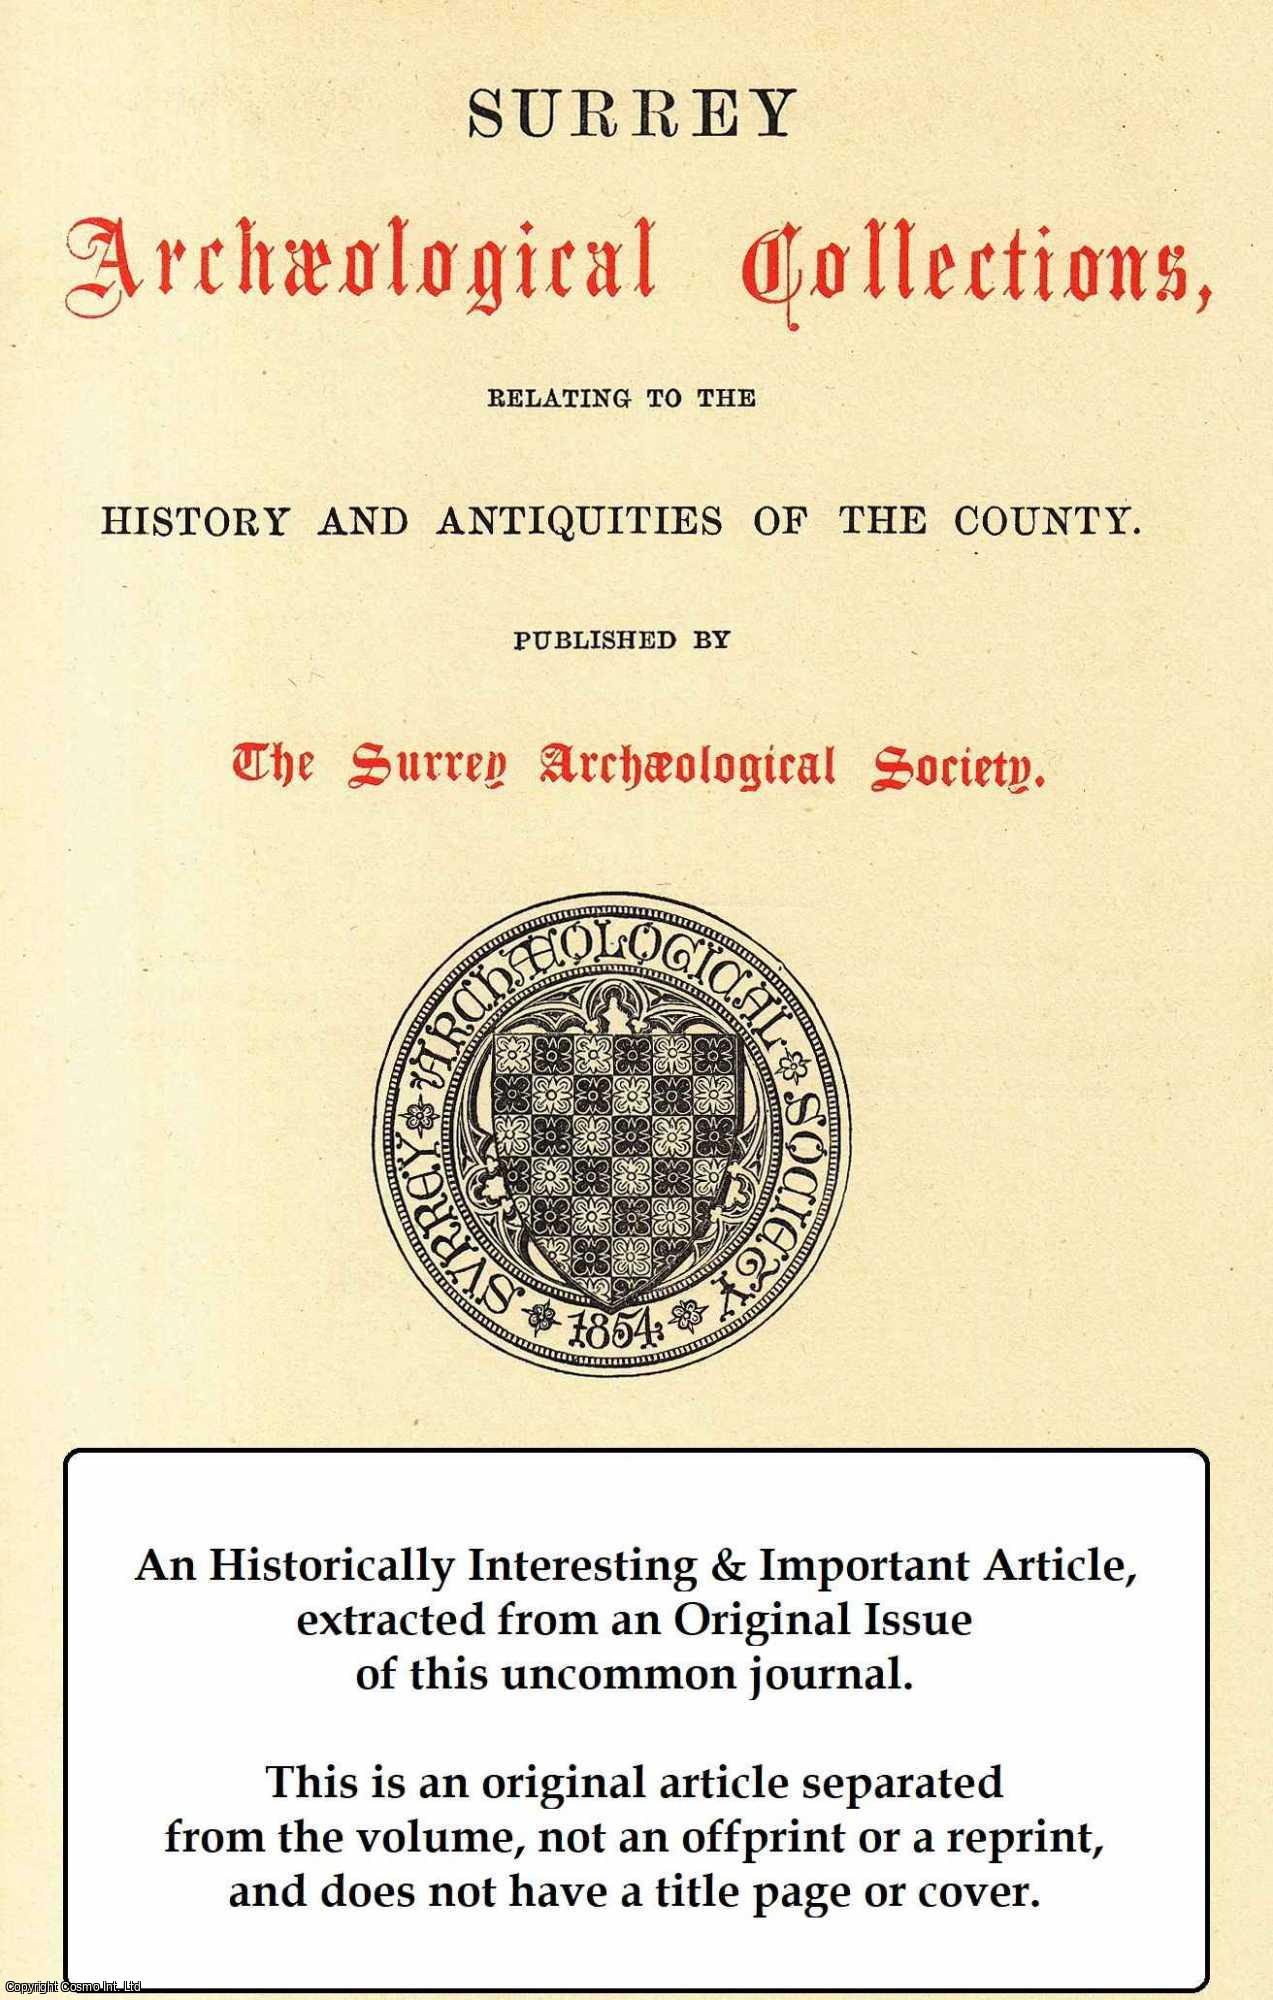 Philip Mainwaring Johnston - Witley and Thursley Churches: Recent Discoveries. A rare original article from the Surrey Archaeological Collections, 1931.